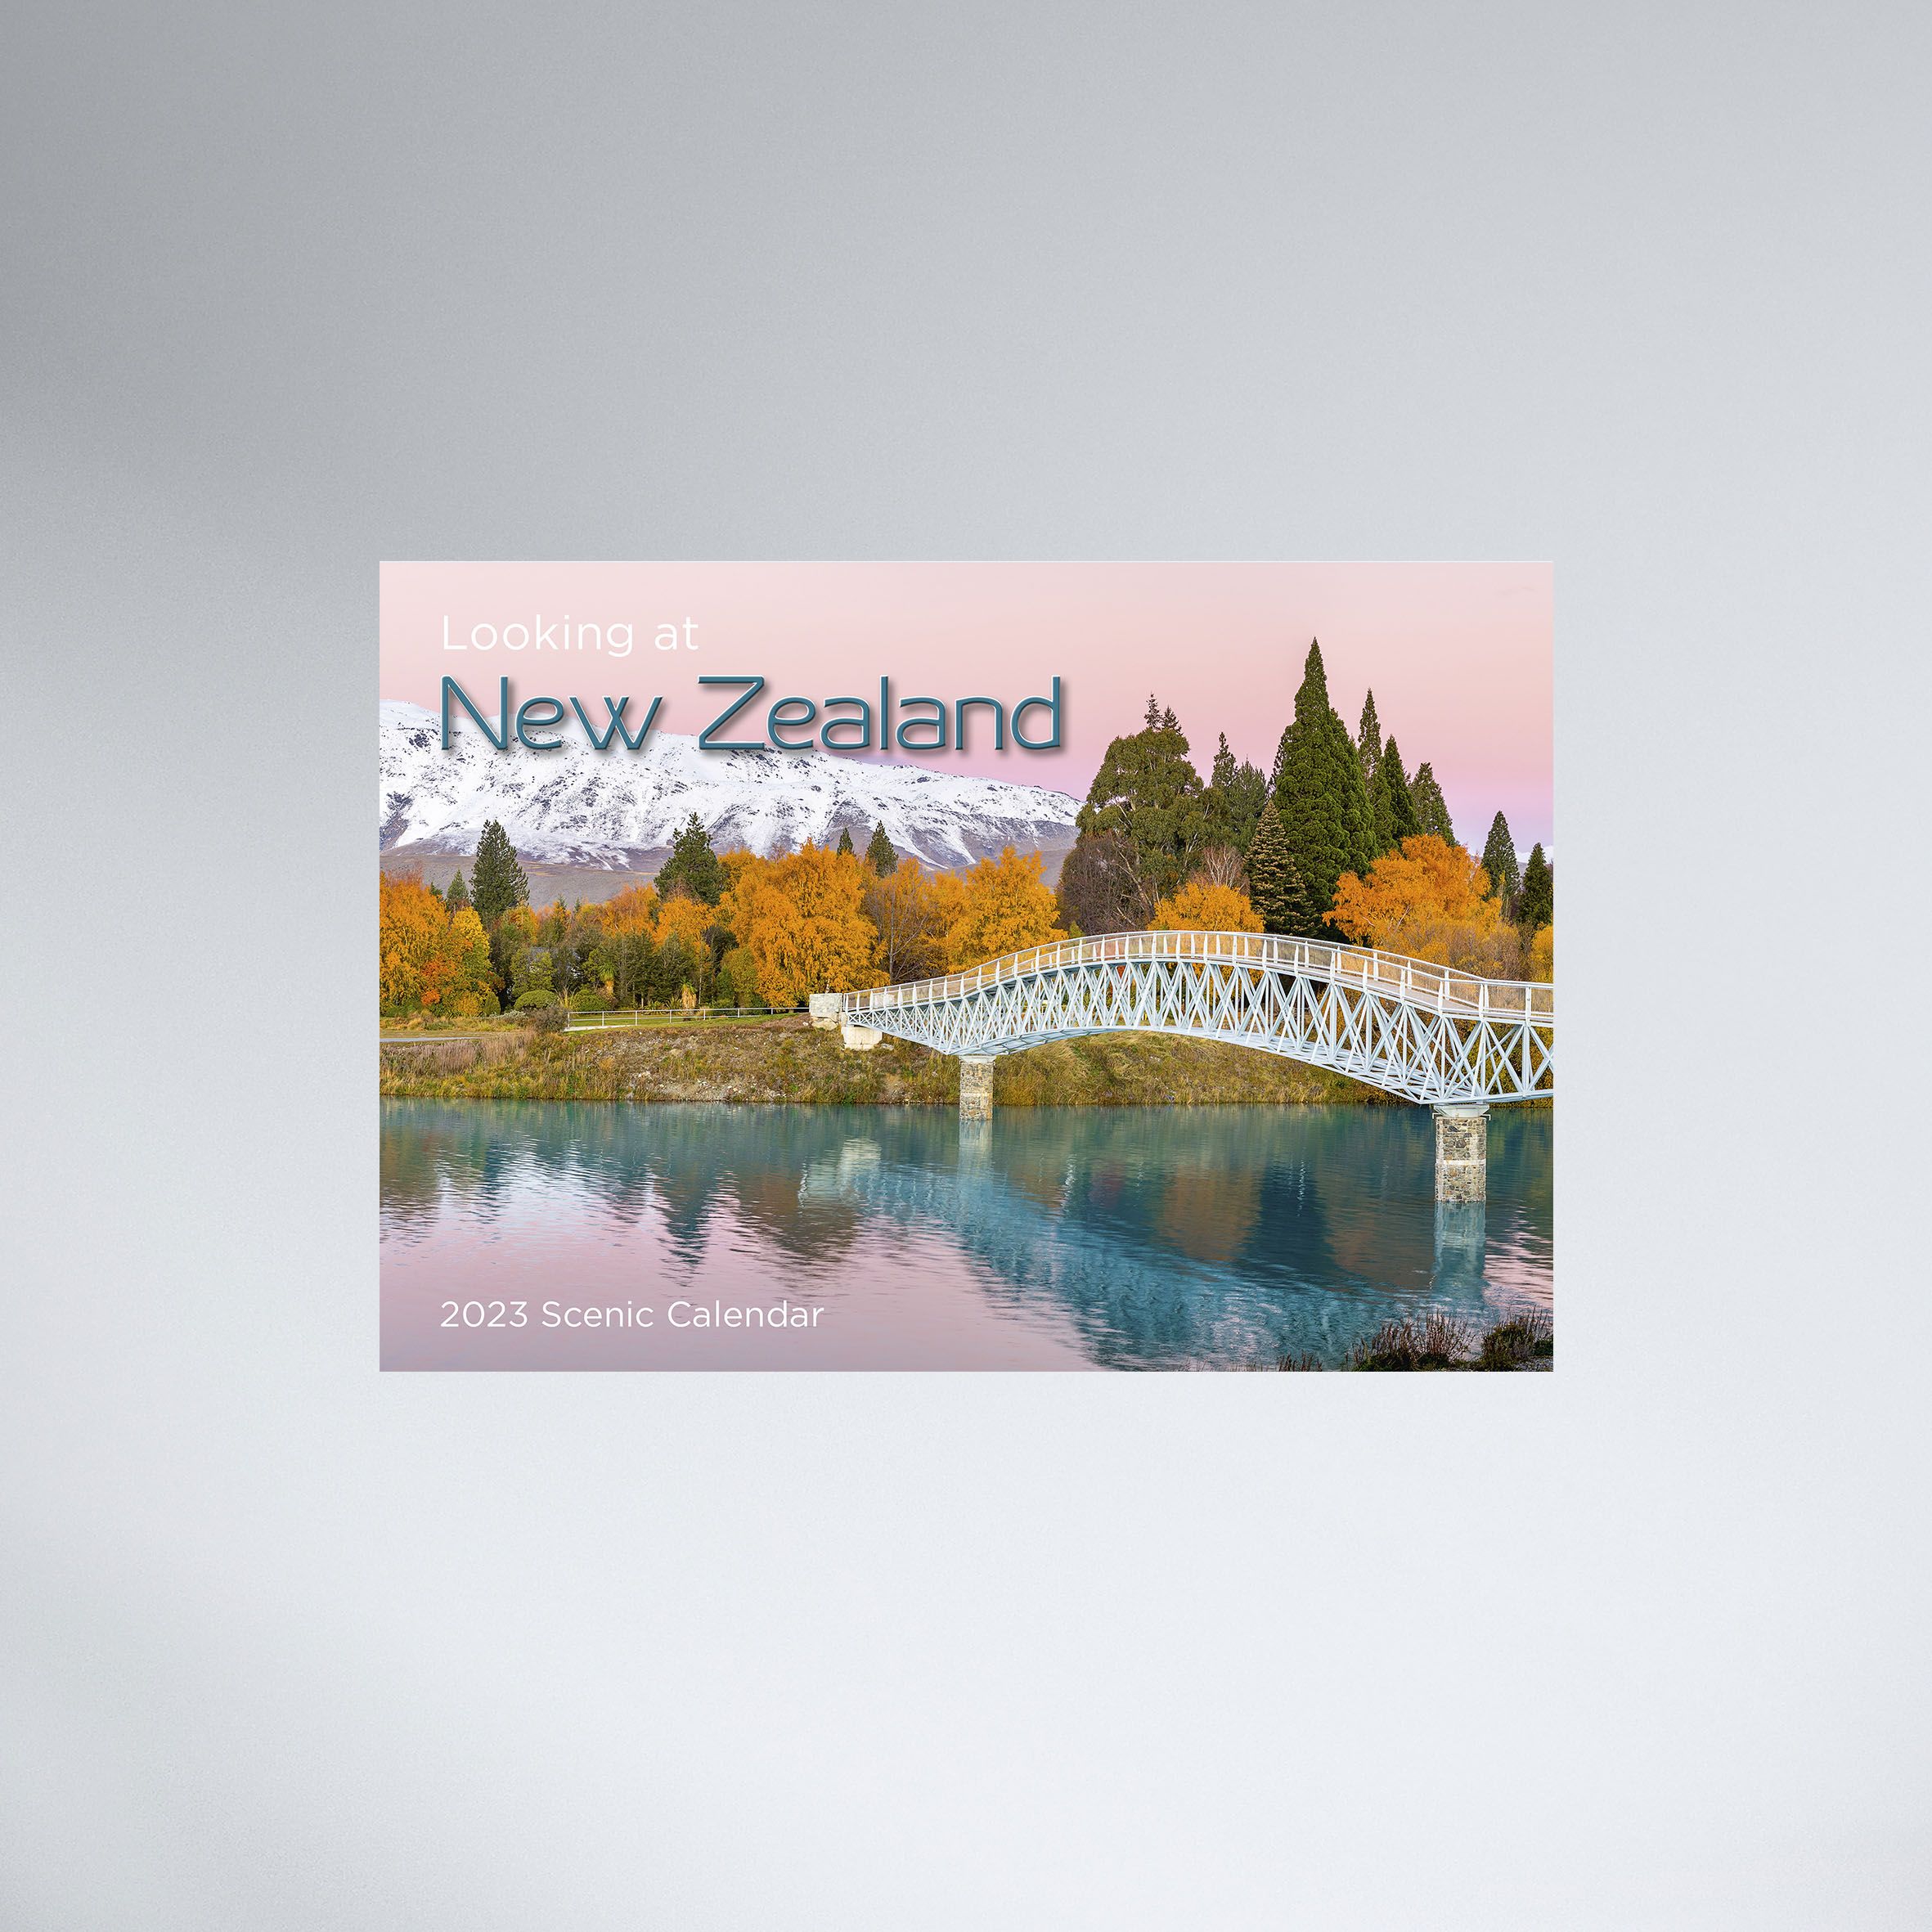 4628_Looking_at_NZ_Booklet_01